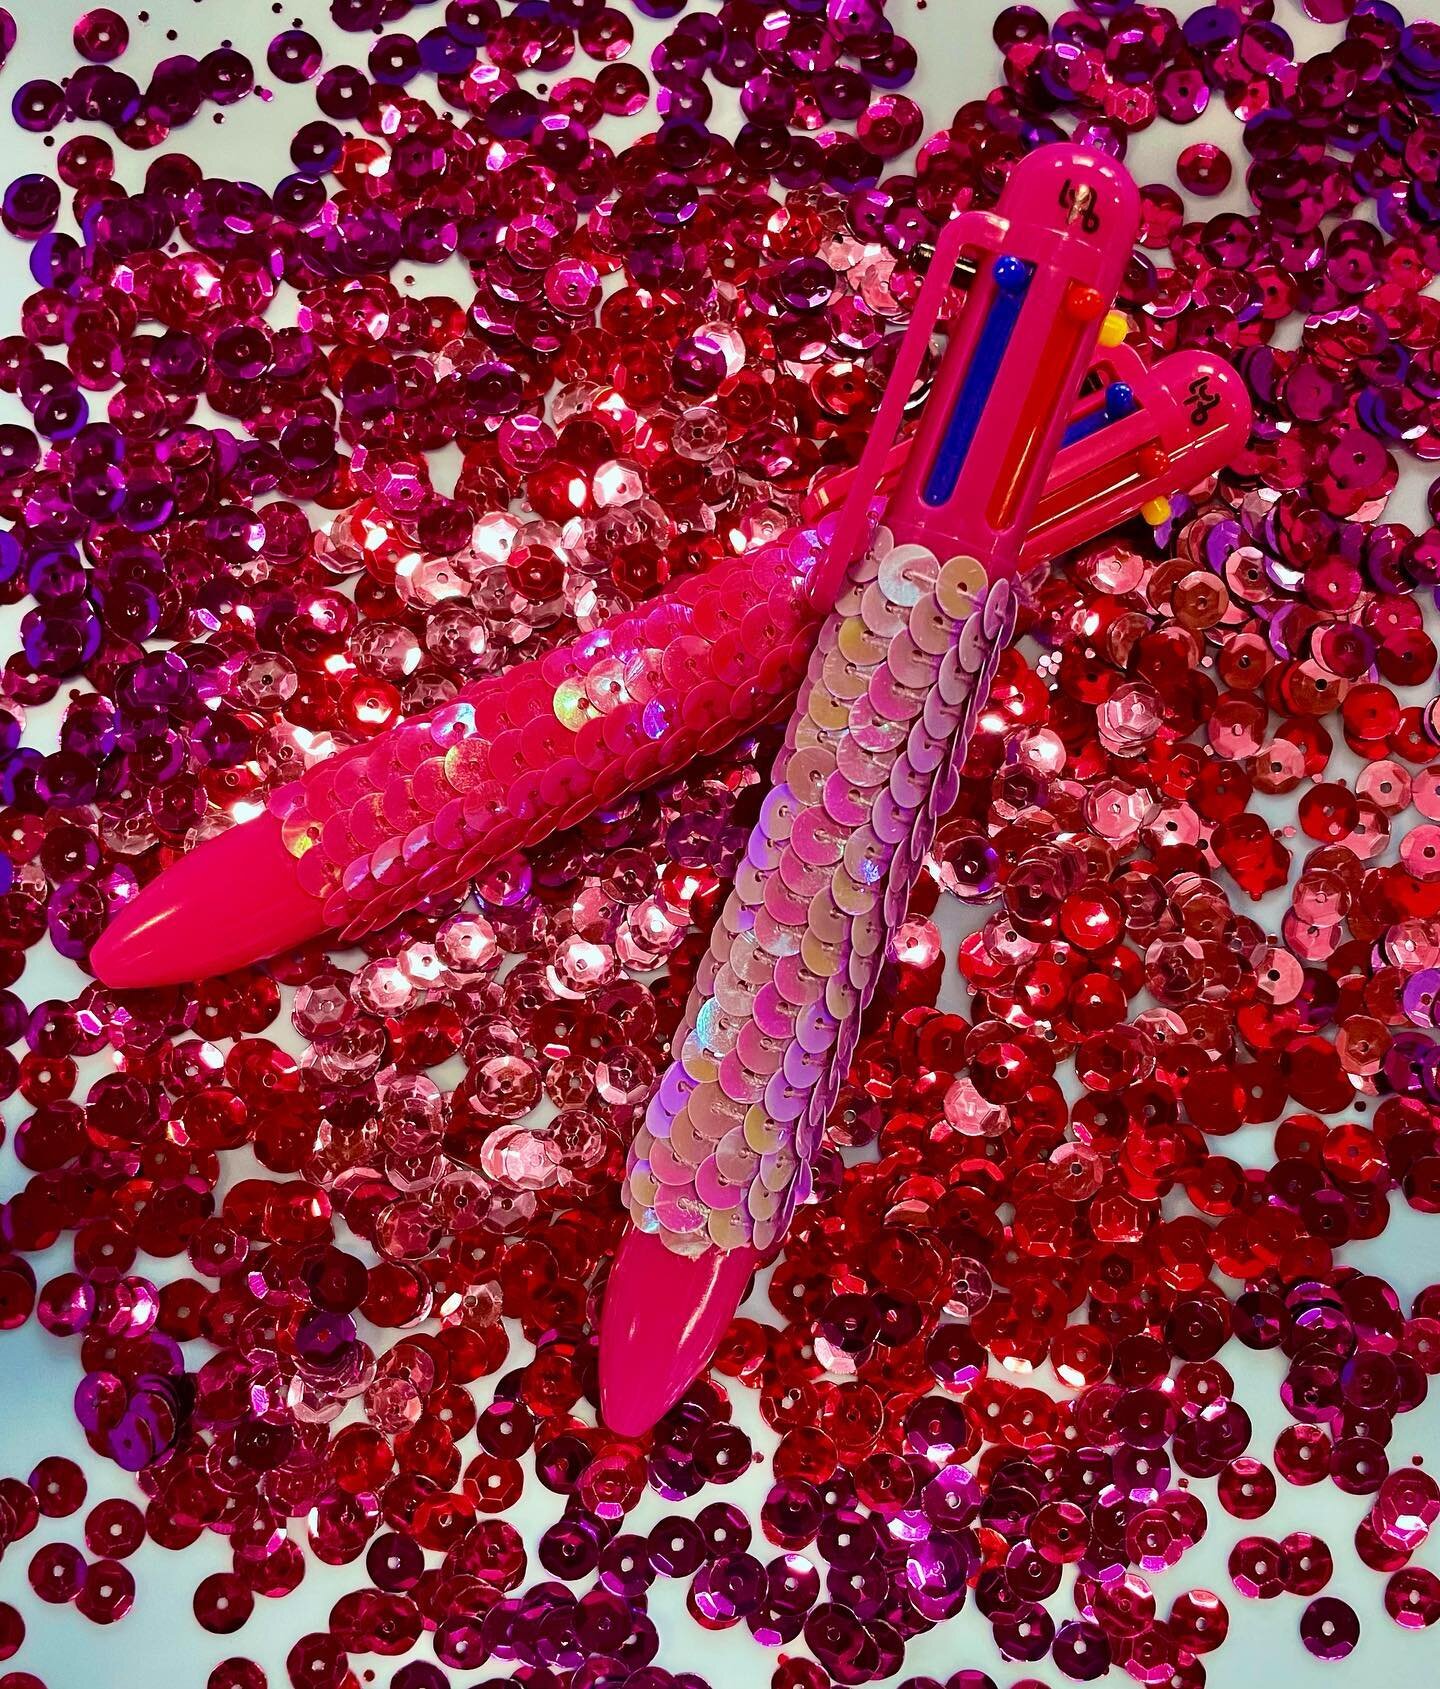 Make all of your doodles and notes sparkle with our new multi color sequin pens coming soon to @staples #staplesfinds #sequins #noveltypens